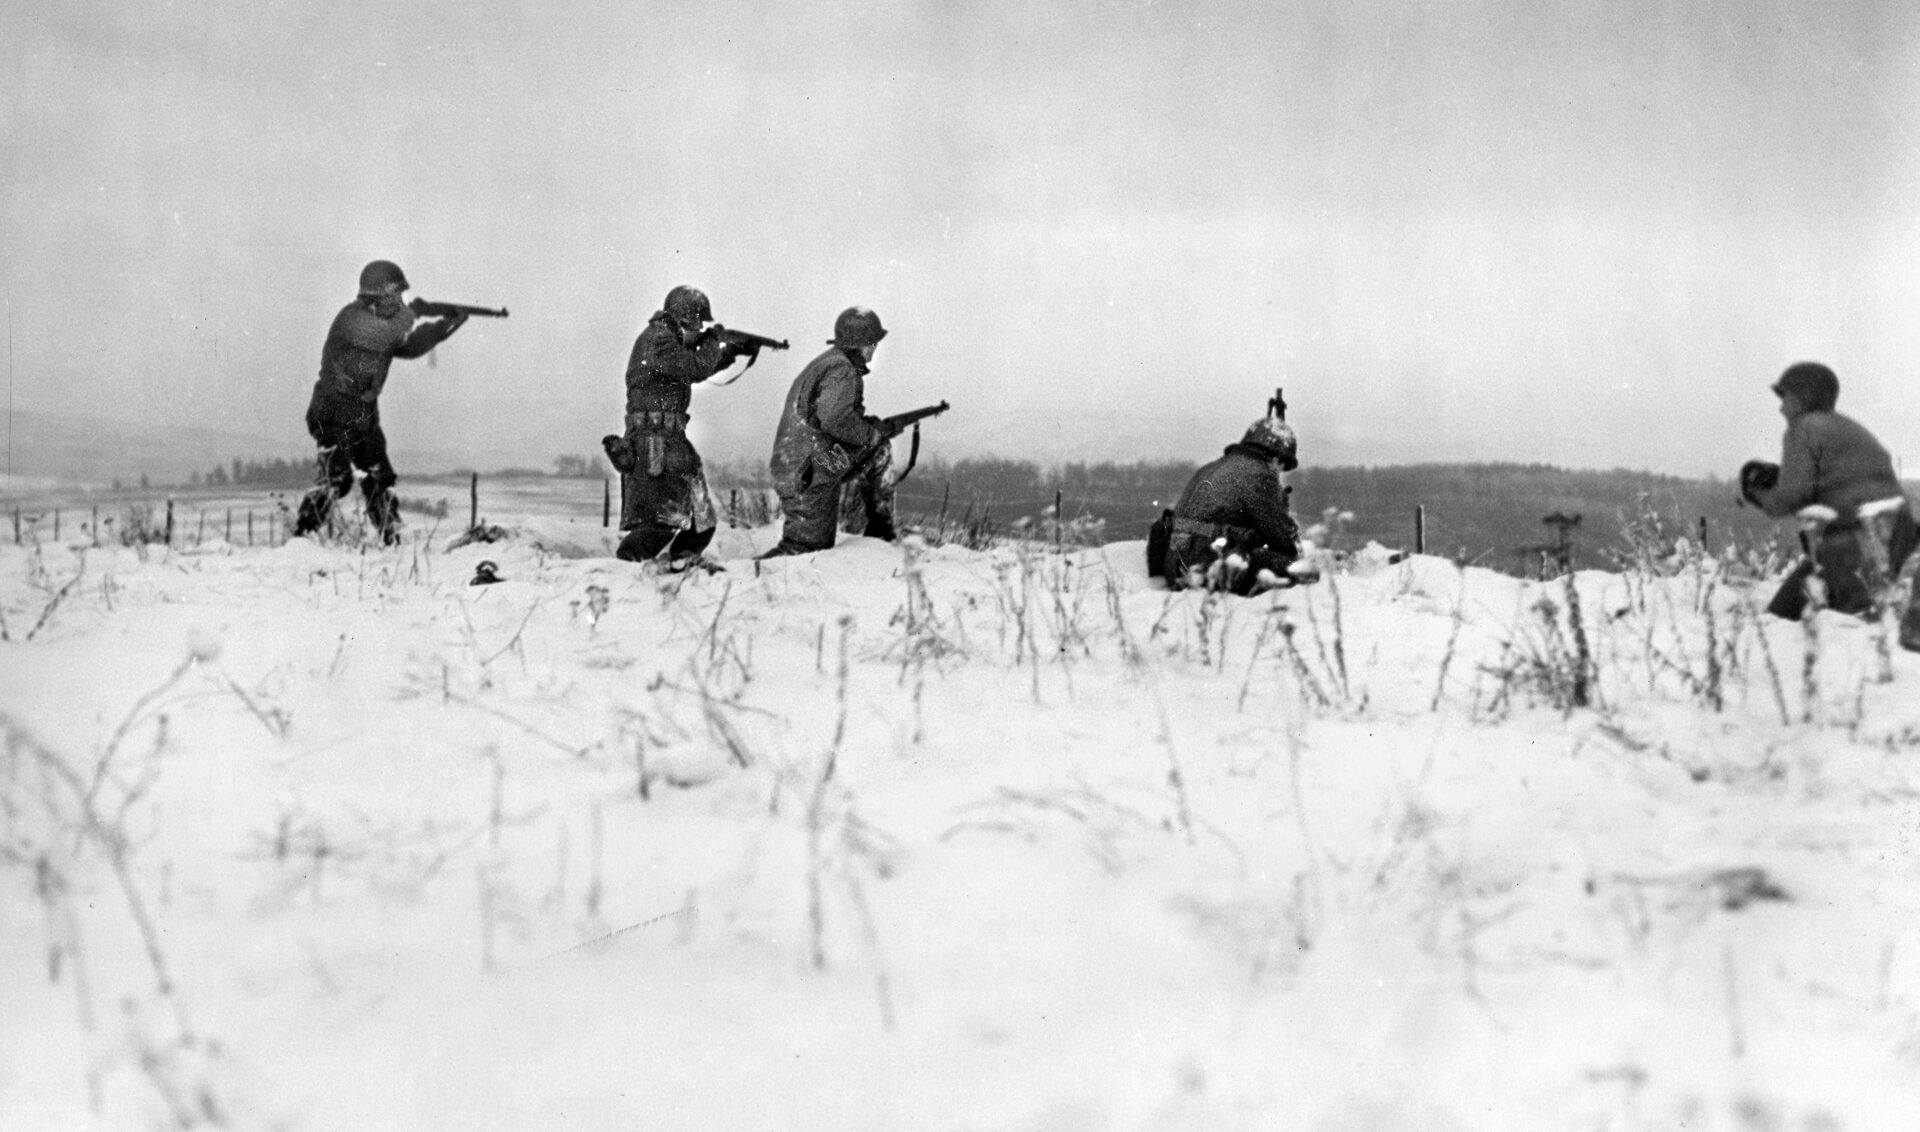 Soldiers with the 290th Infantry, 75th ID, fire on German snipers in Beffe Belgium on January 7, 1945. Bush fought in the snow and ice in Bastogne, and again near Beffe.